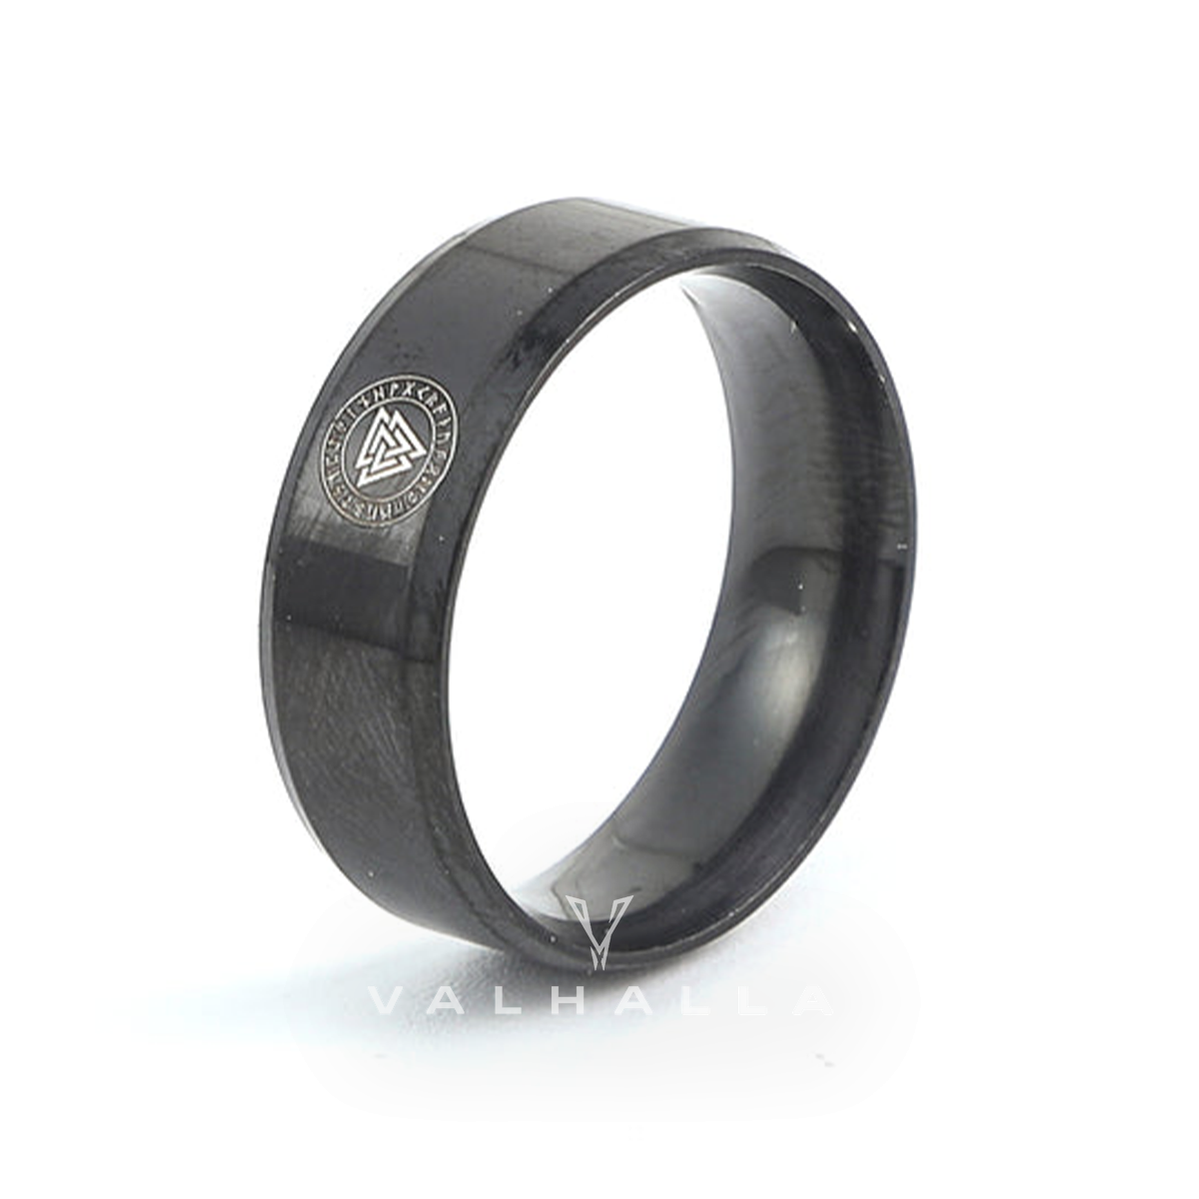 Black Handcrafted Stainless Steel Valknut and Rune Ring